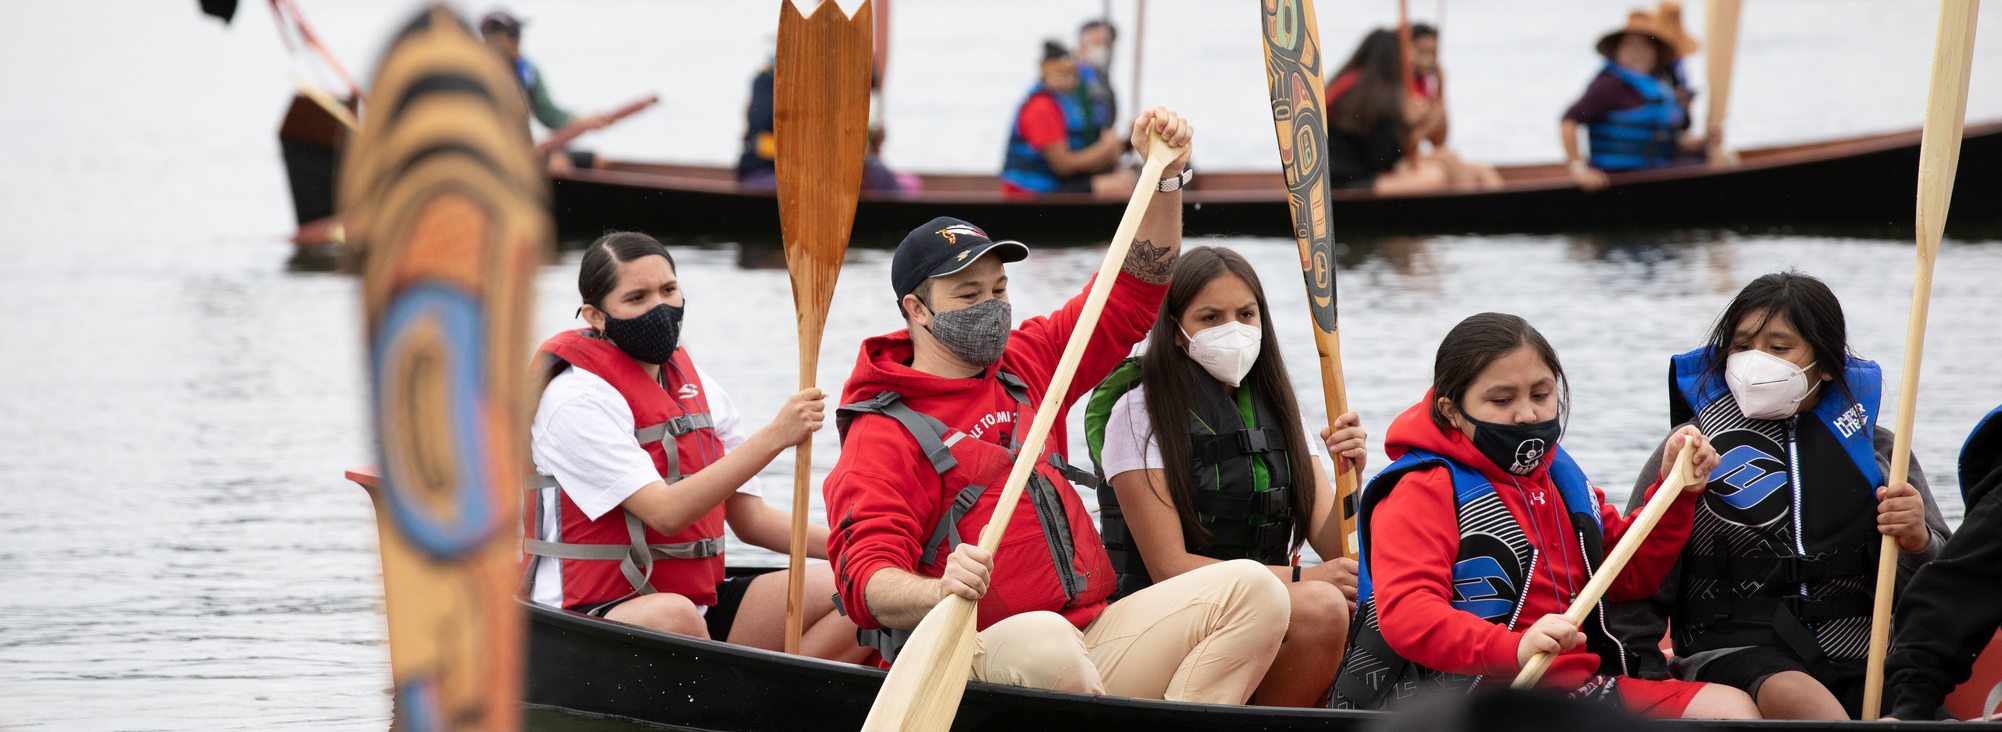 Portland All Nations Canoe Family rowing in a canoe together in the Columbia River